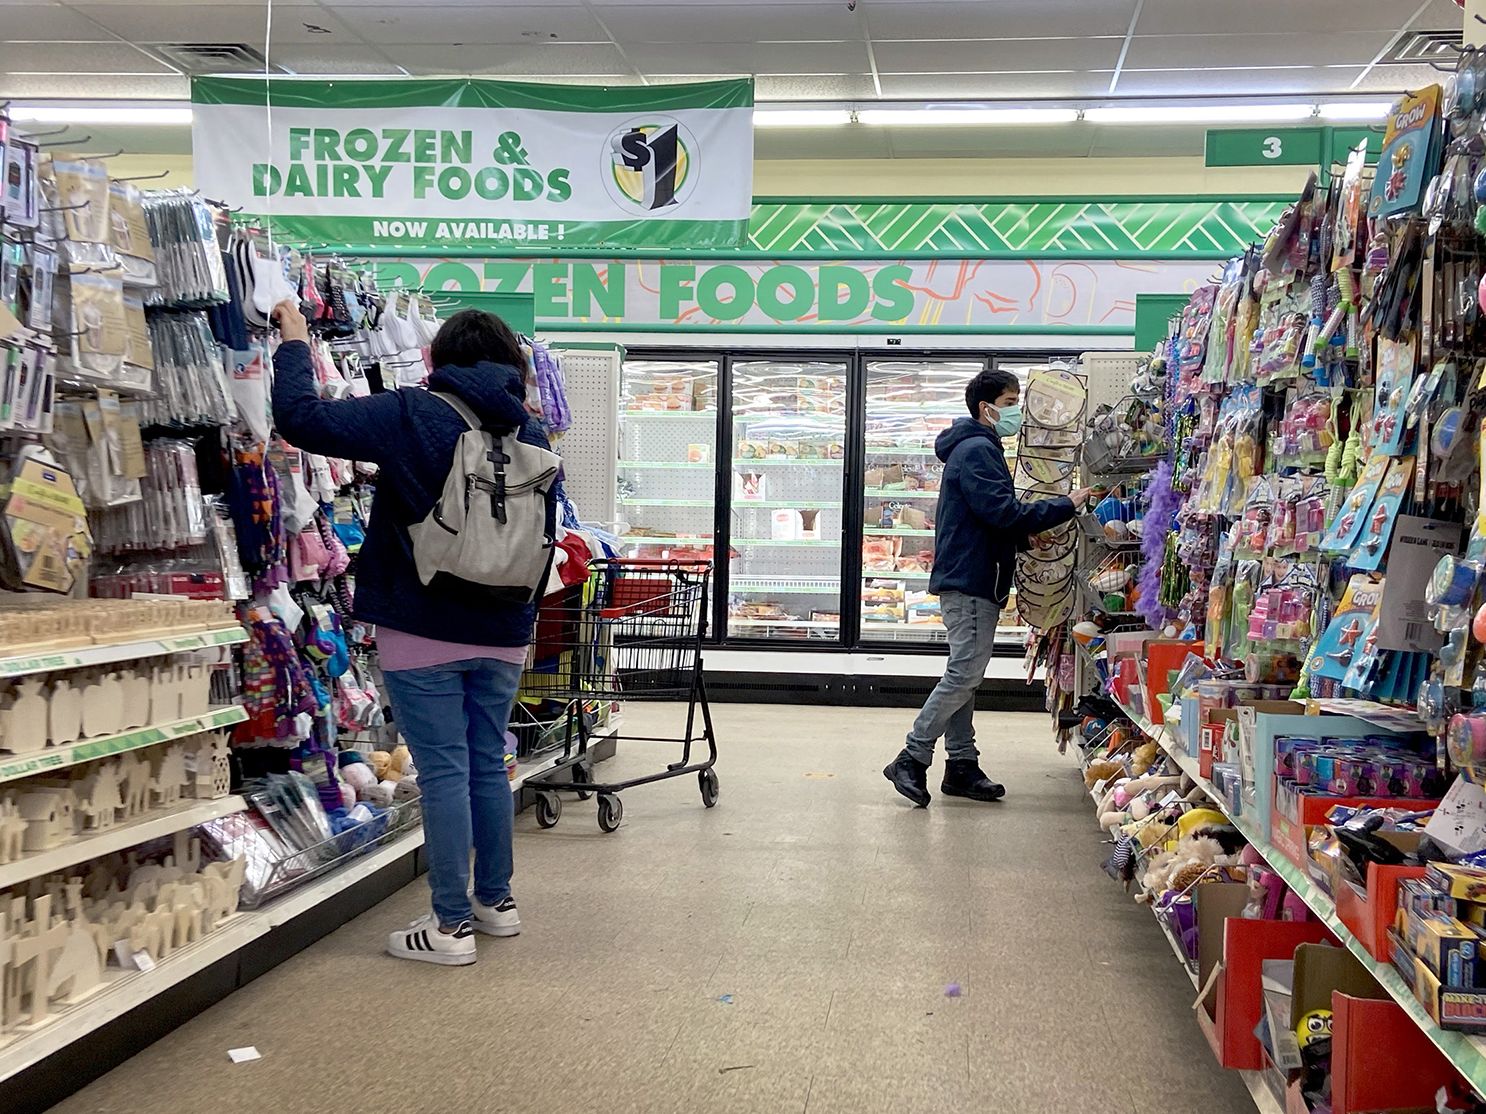 Dierentuin s nachts vasthoudend draai Why Dollar Tree's price hike to $1.25 could be 'one of the worst decisions  in retail history' | CNN Business